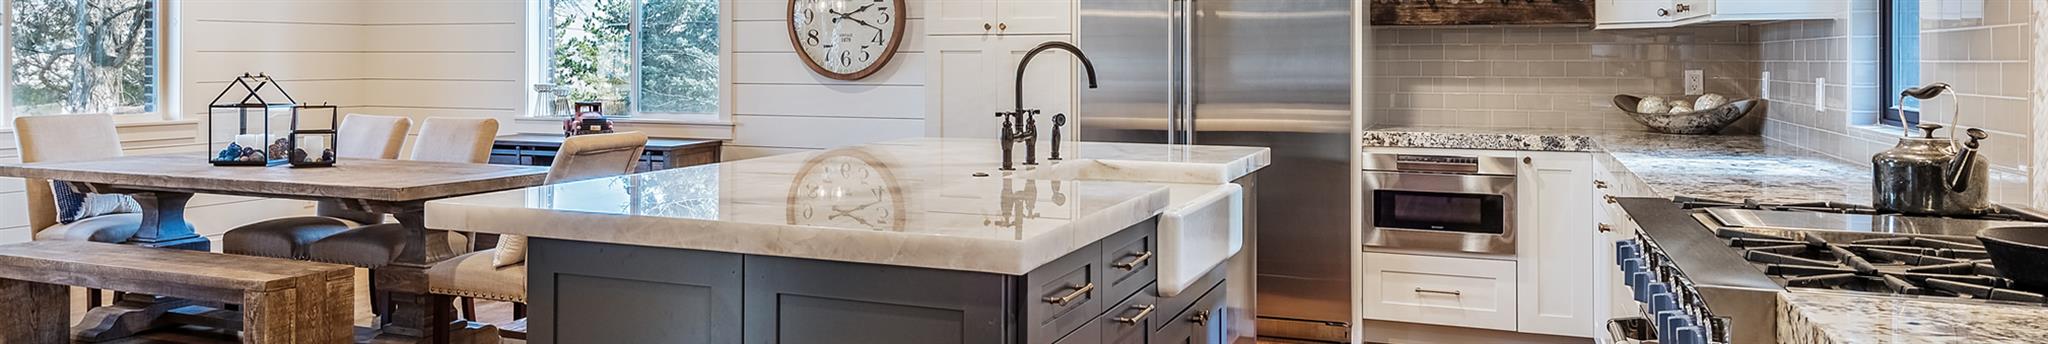 FAQs About Natural Stone Countertops